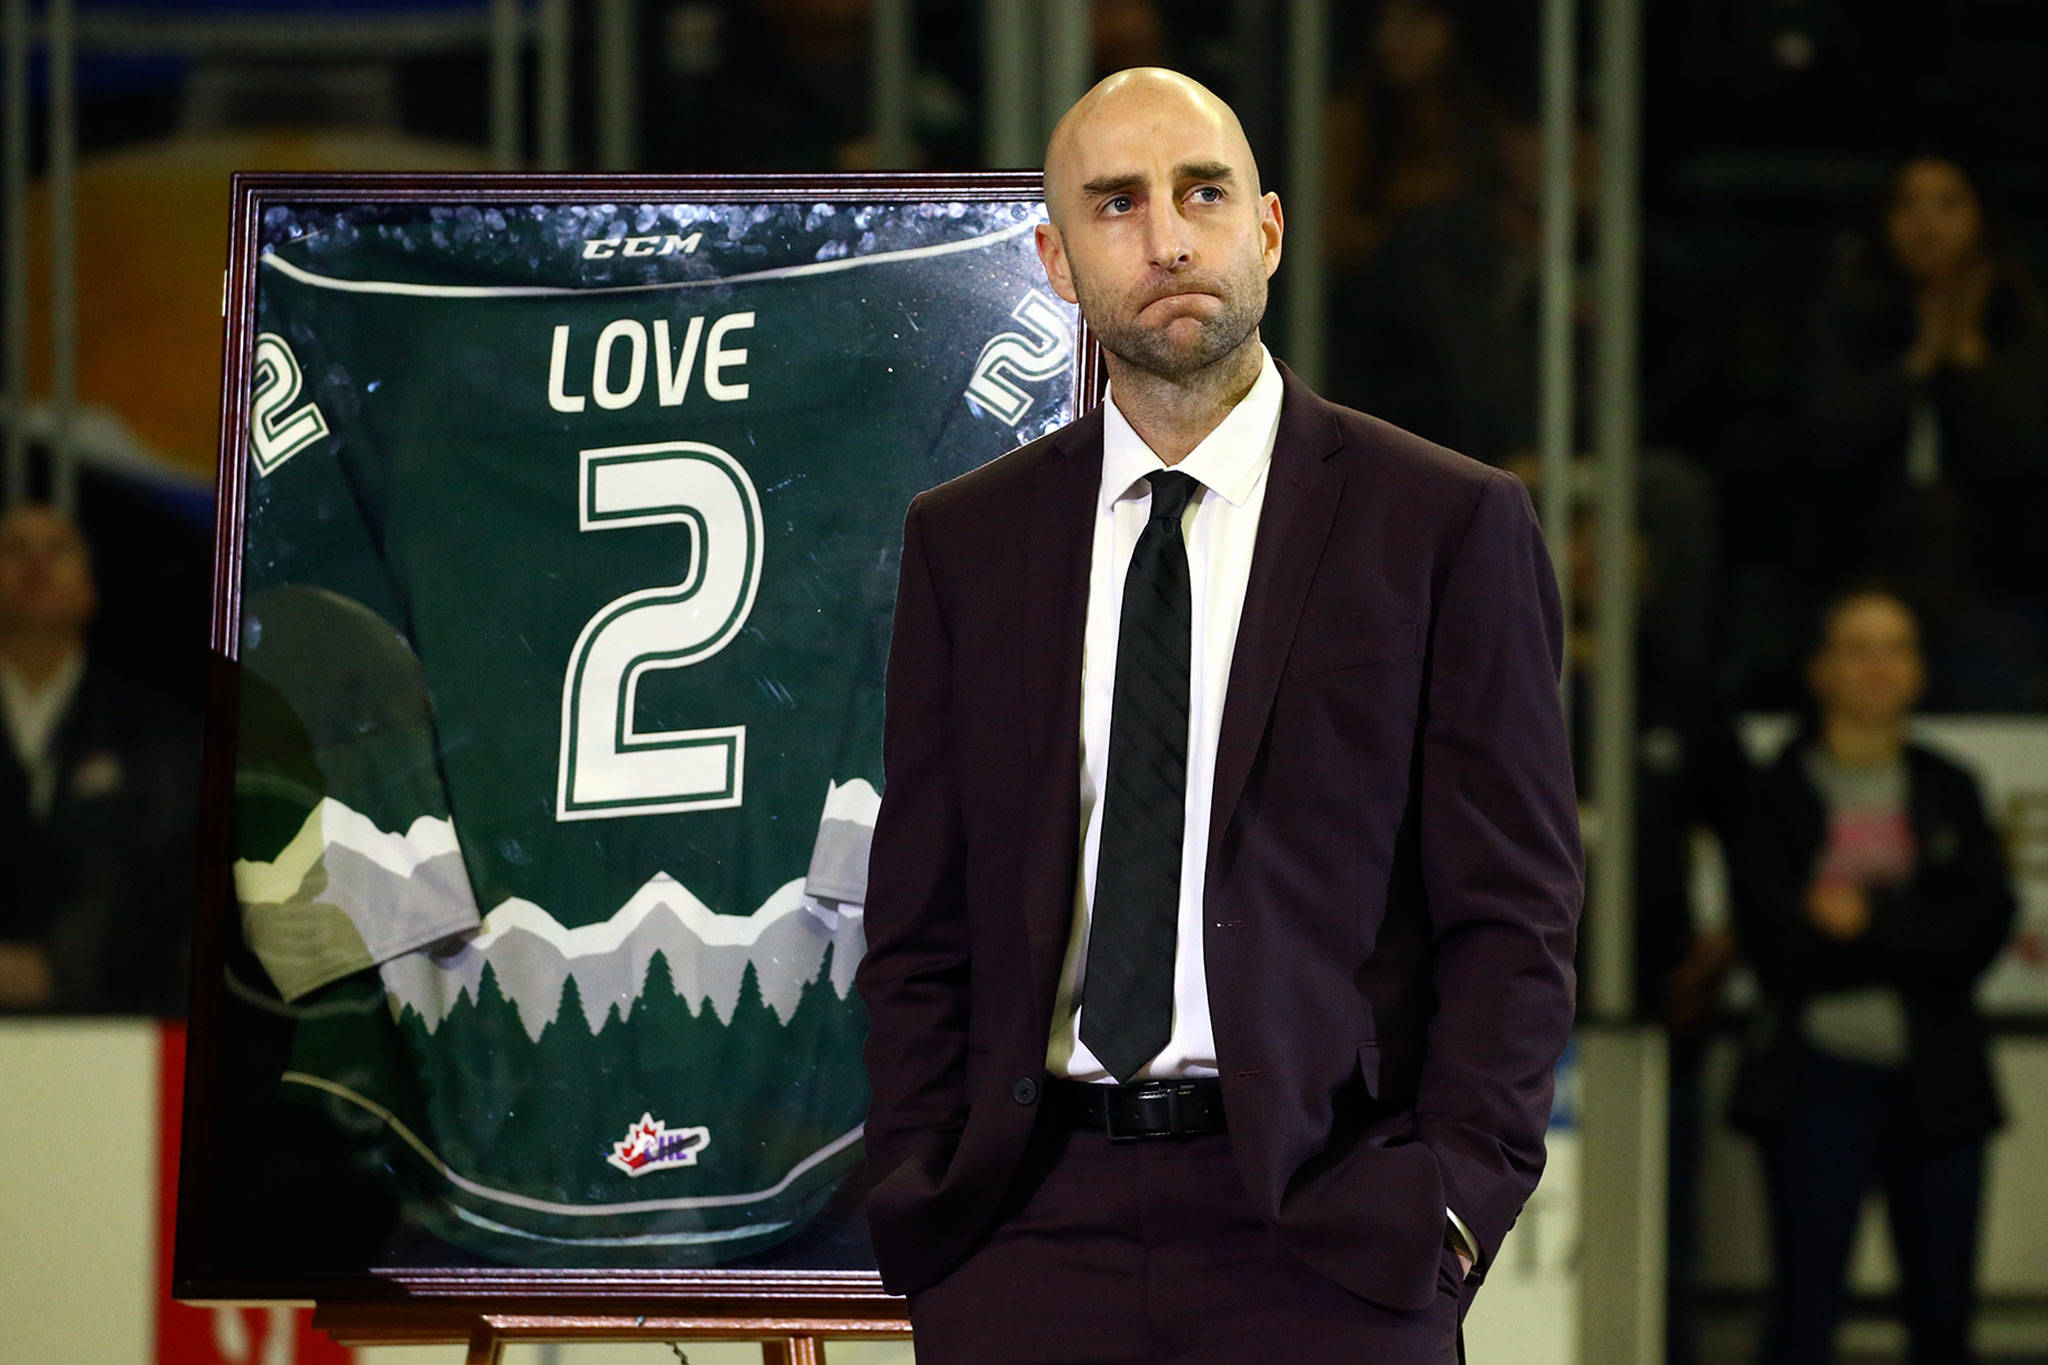 Mitch Love, seen here when his Silvertips number was retired in 2019, was named coach of the AHL’s Stockton Heat on Monday. (Kevin Clark / Herald file)